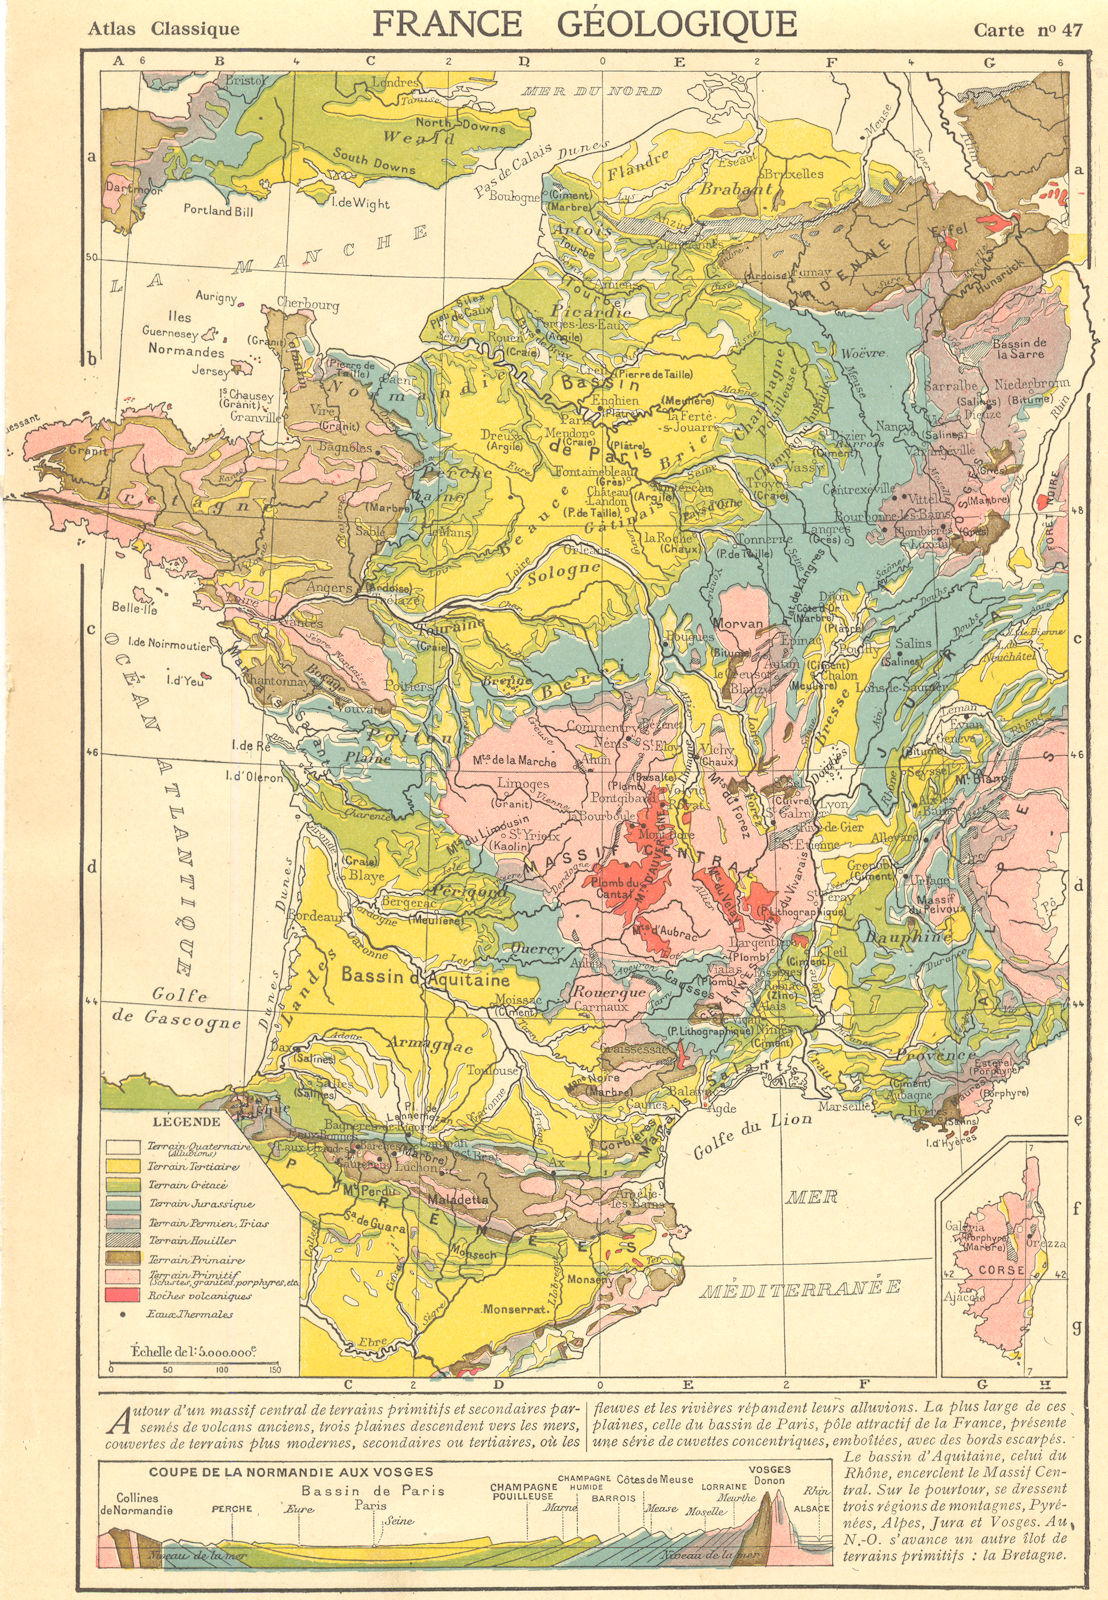 Associate Product FRANCE. France Geologique. Inset map of Corsica 1923 old antique chart